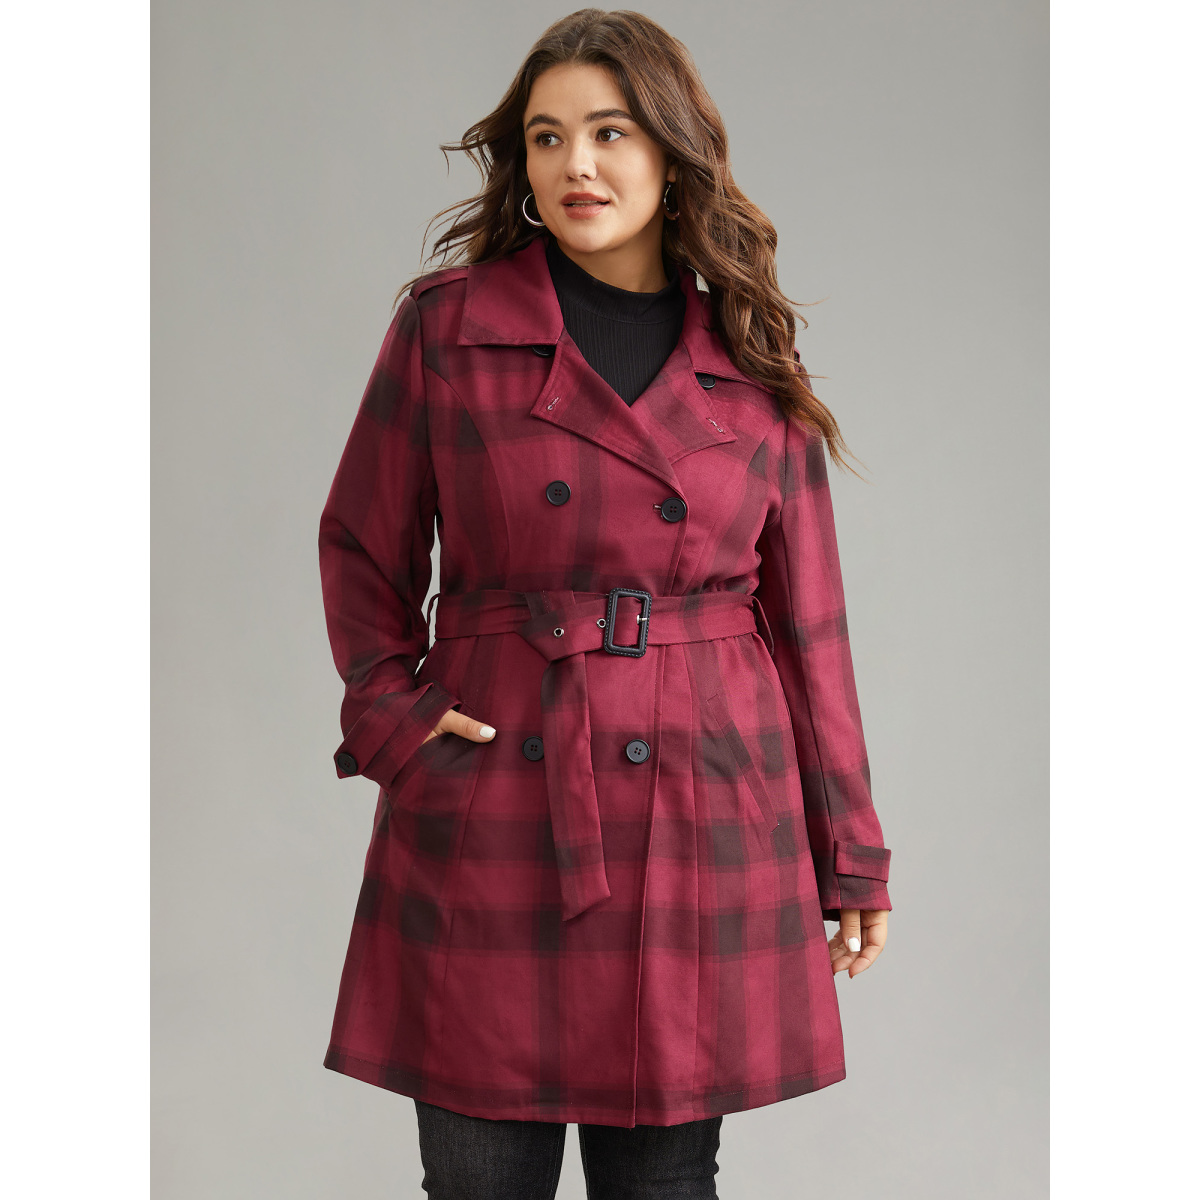 

Plus Size Lapel Collar Plaid Belted Double Breasted Coat Women Scarlet Elegant Lined Ladies Dailywear Winter Coats BloomChic